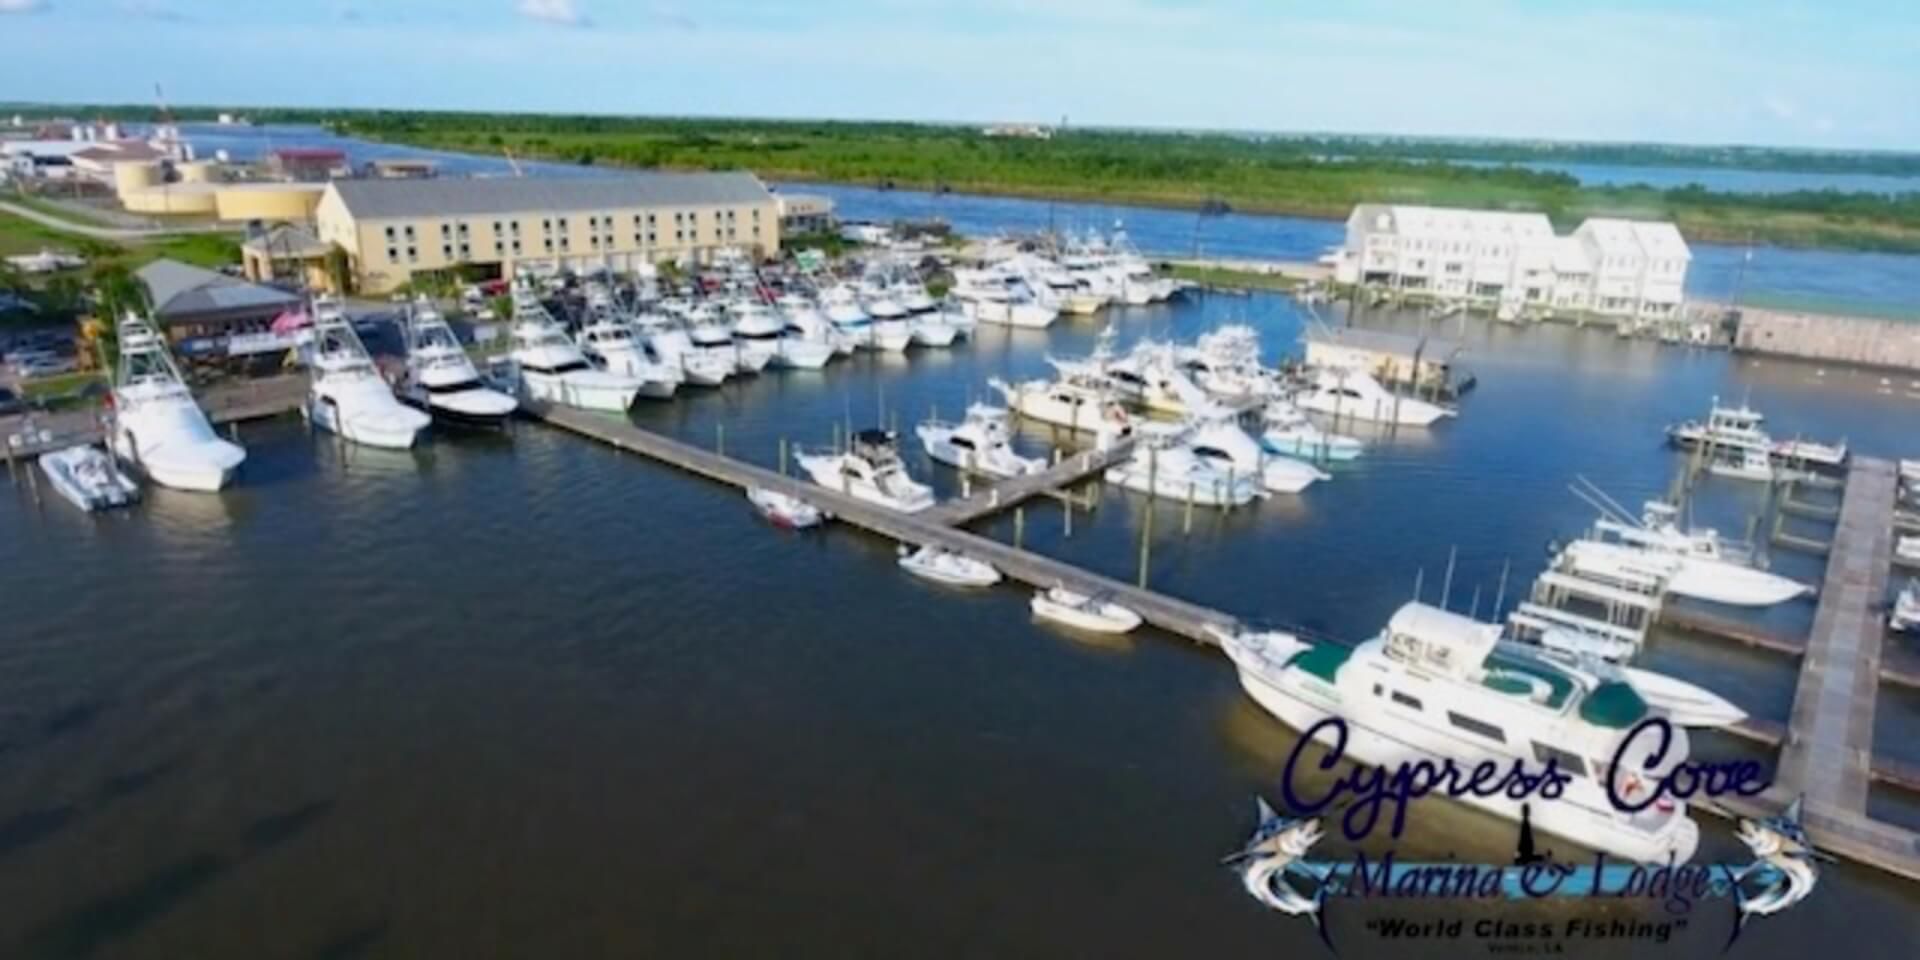 Stay at Cypress Cove Lodge on your charter fishing trip